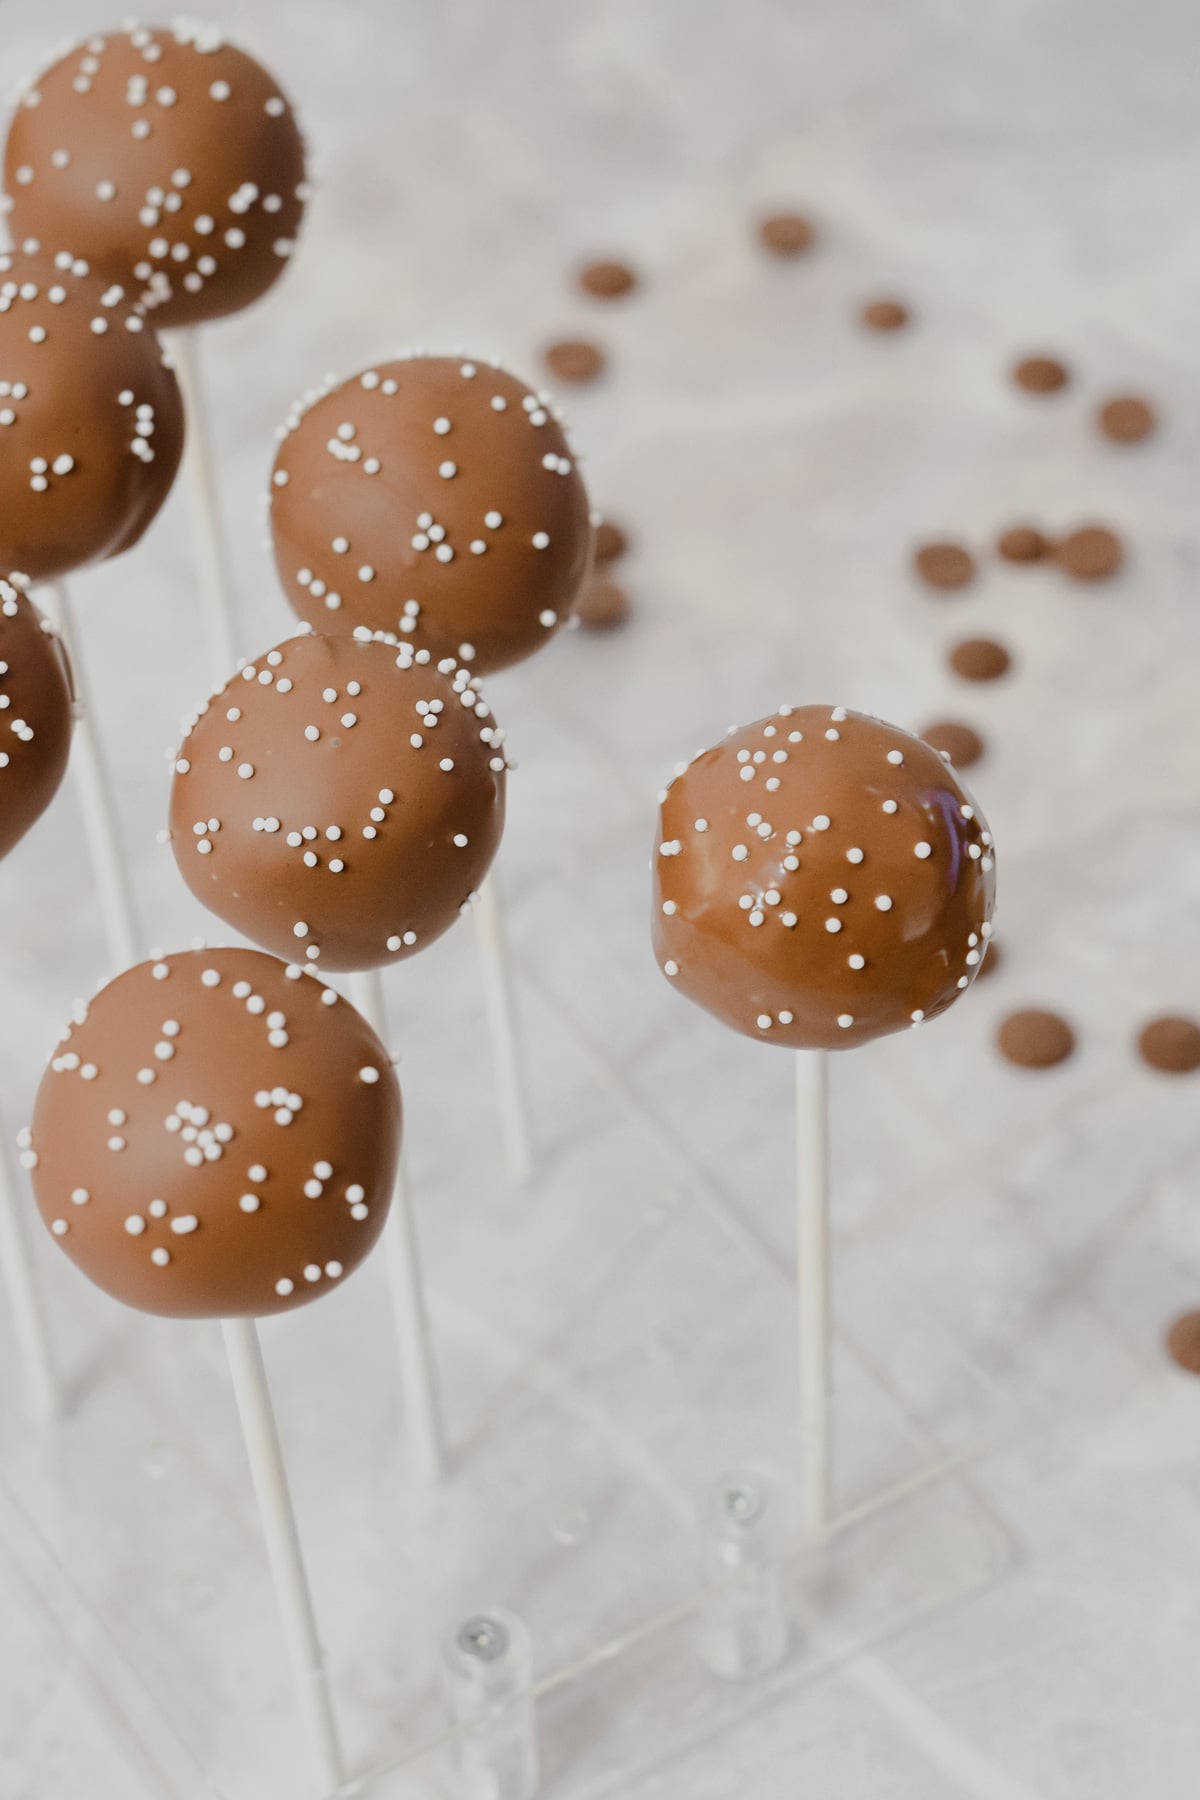 starbucks copycat chocolate coated chocolate cake pops with white sprinkles in stand